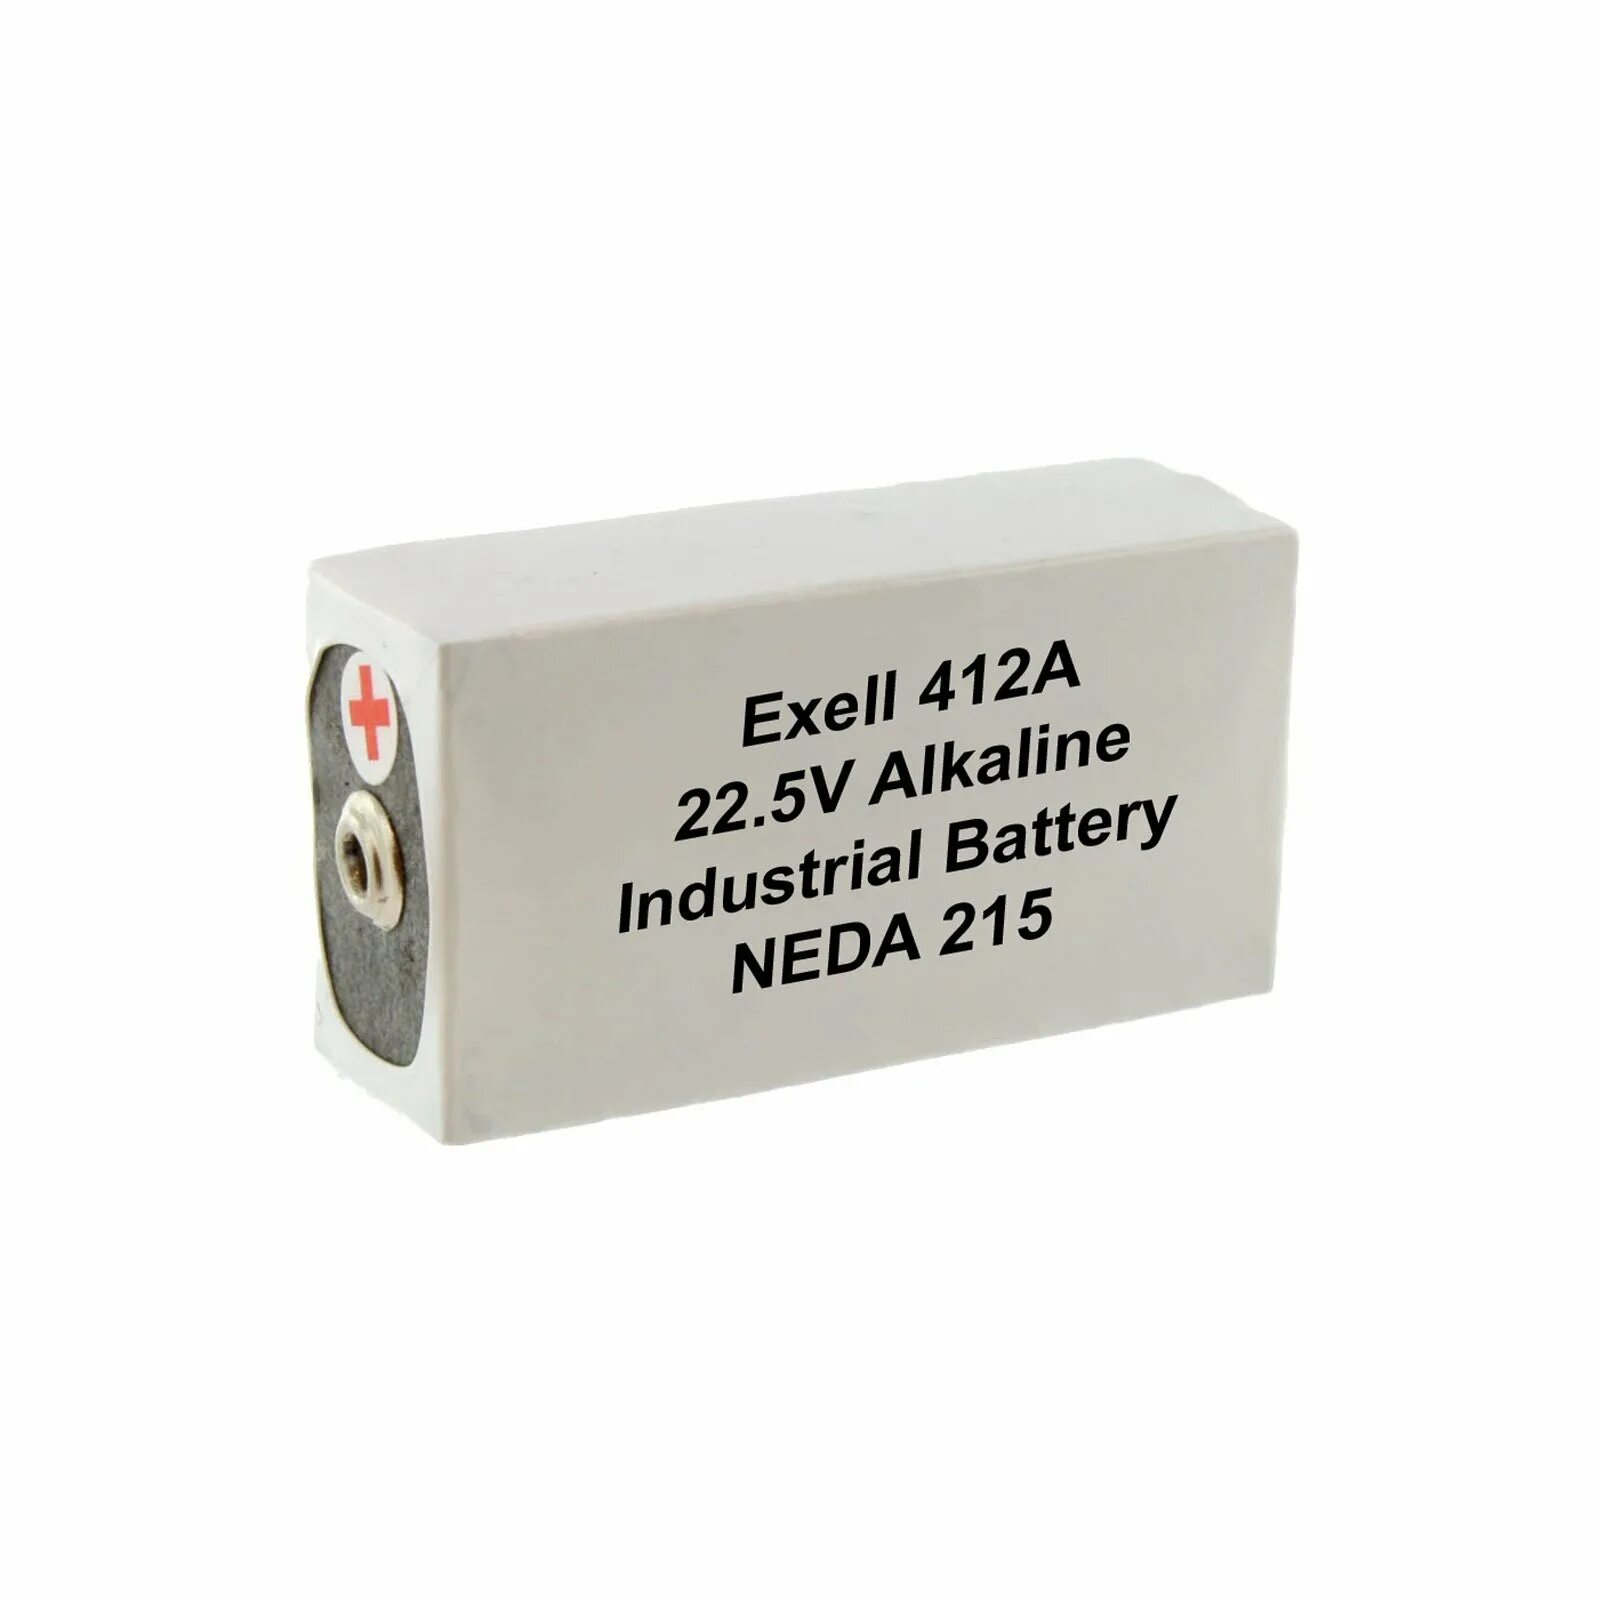 Has battery. A022 Battery.